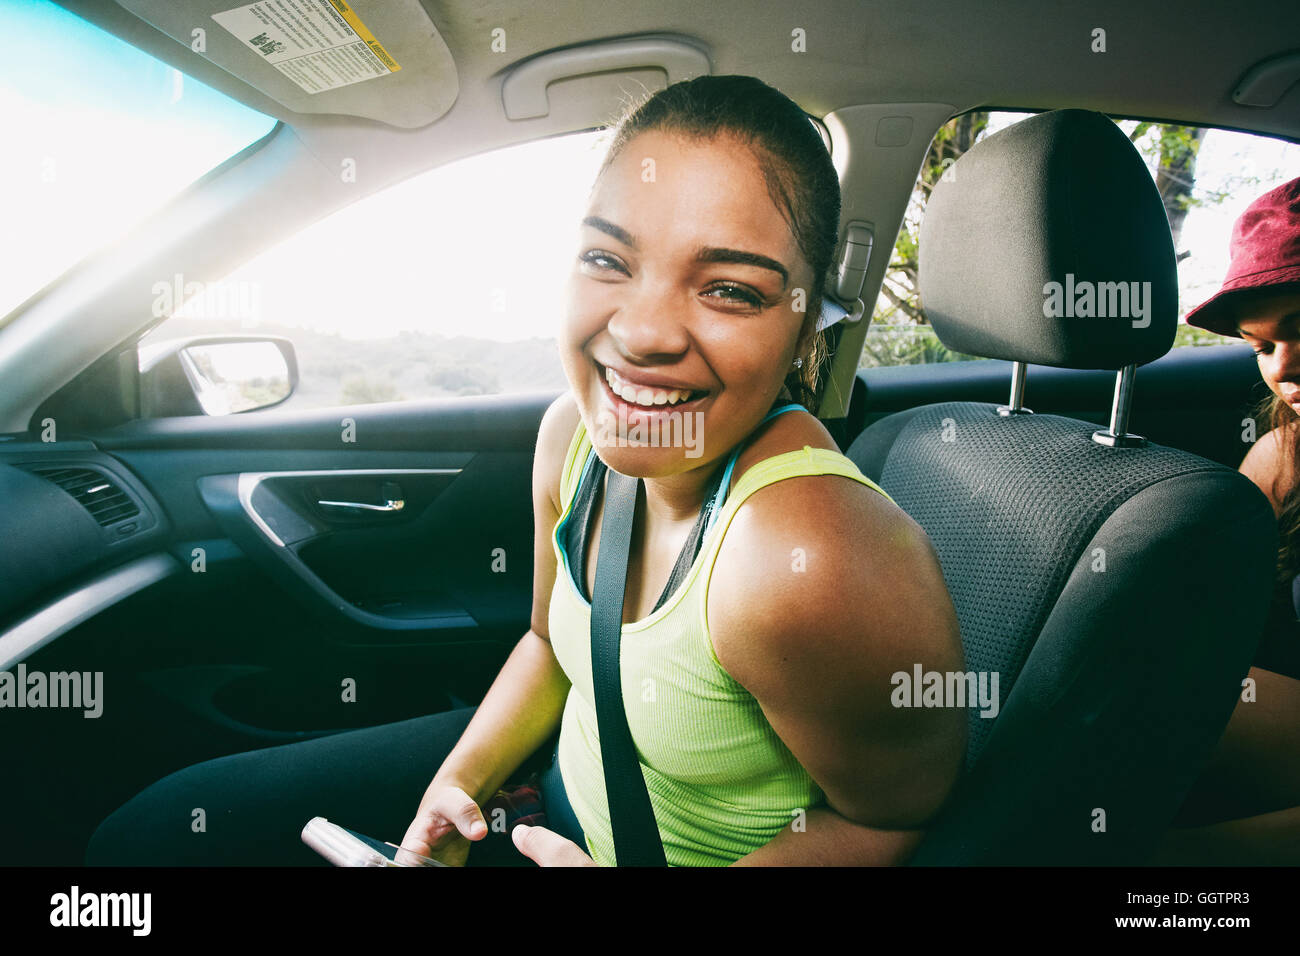 Mixed Race woman laughing in car Stock Photo